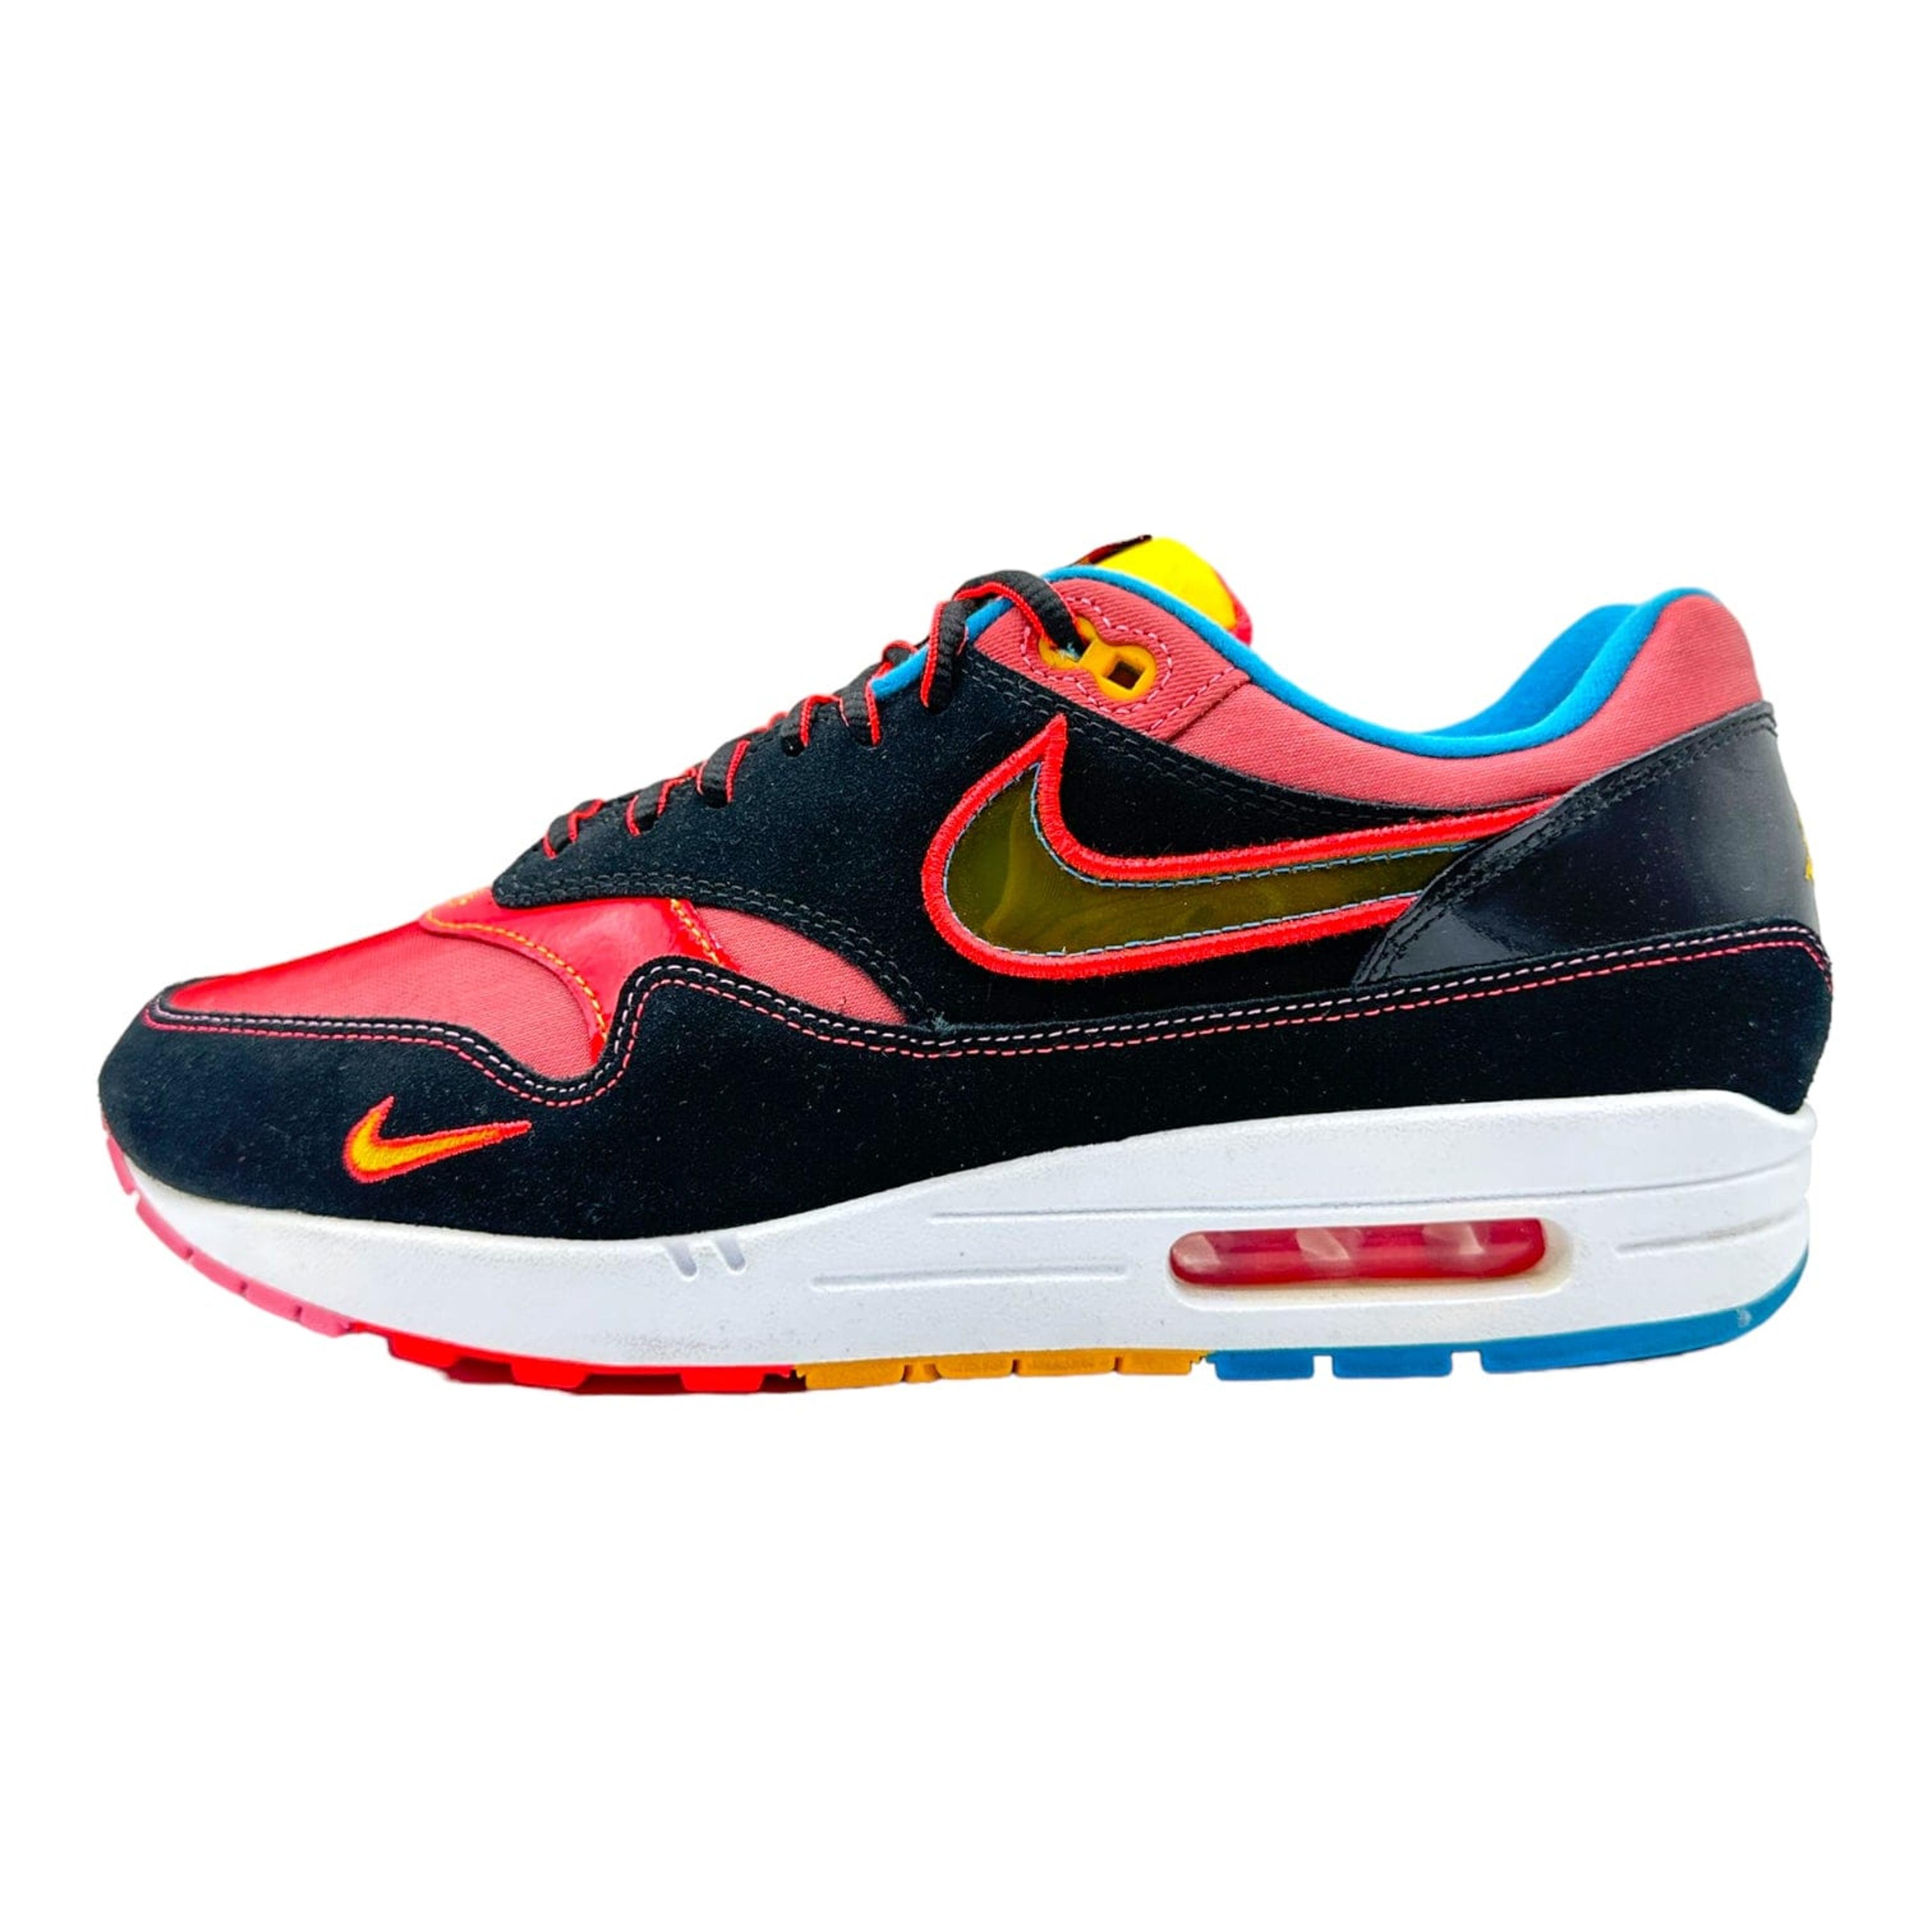 Alternate View 1 of Nike Air Max 1 Chinatown New York (2020) Pre-Owned